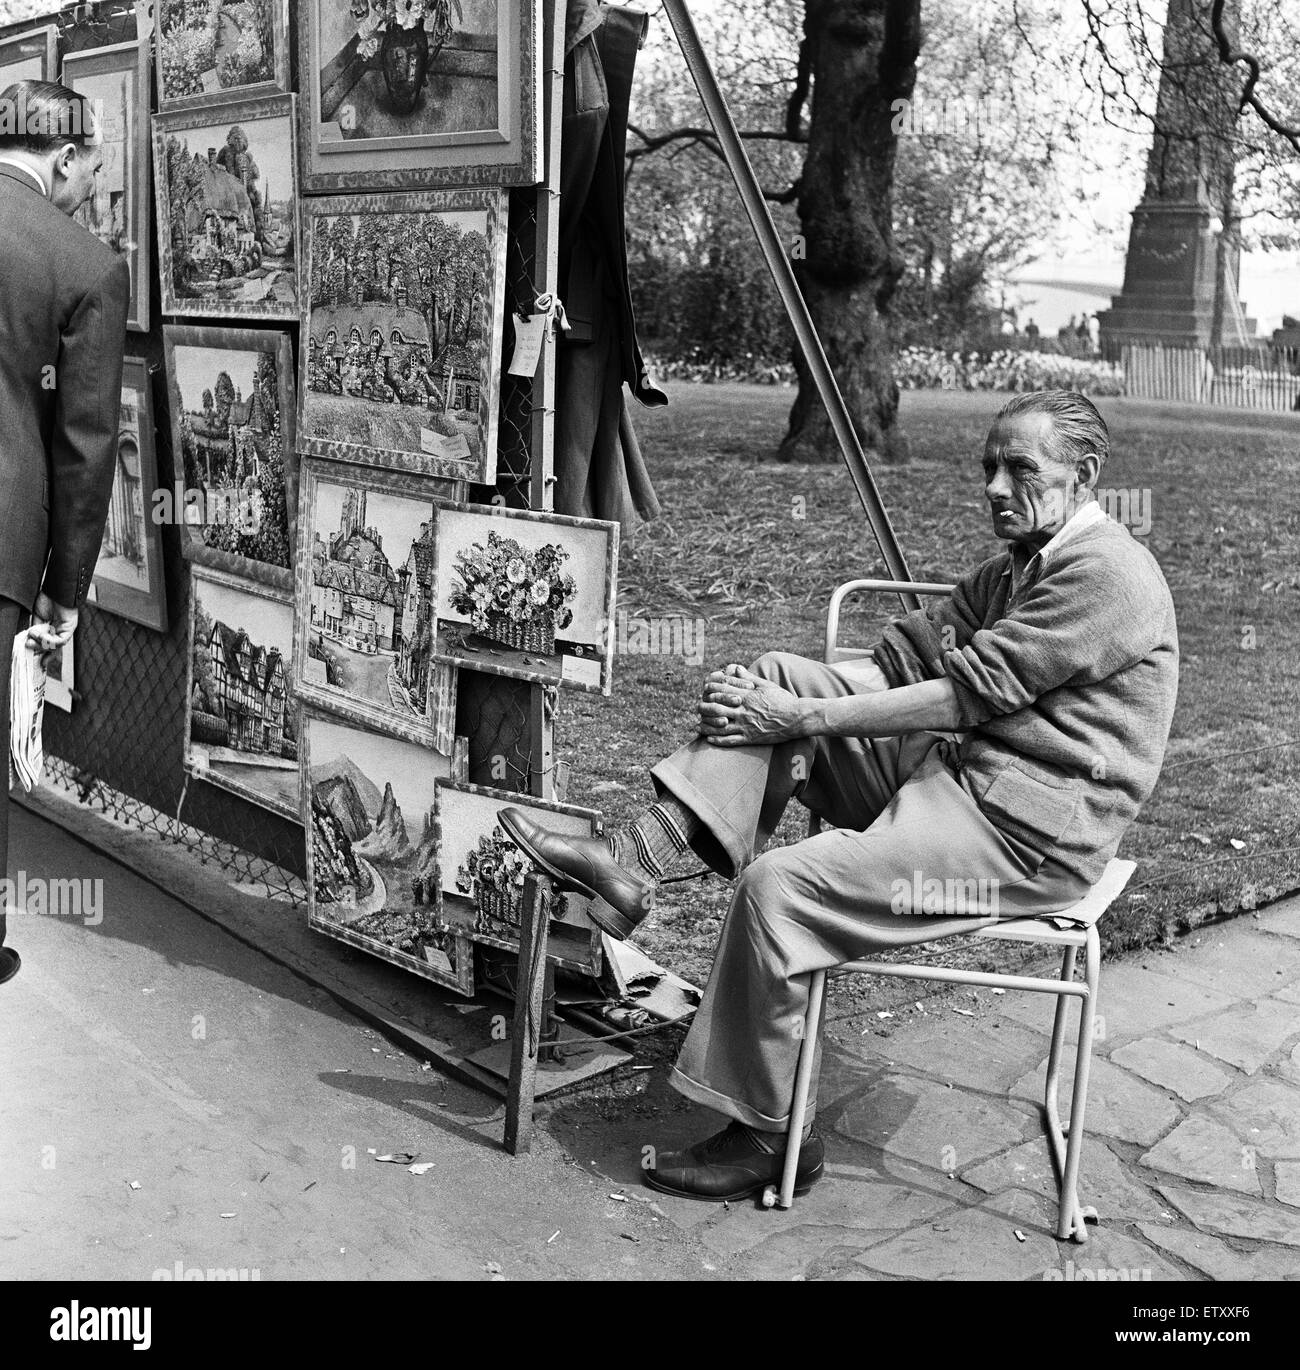 An exhibition of paintings at the Victoria Embankment Gardens. London, 12th May 1954. Stock Photo